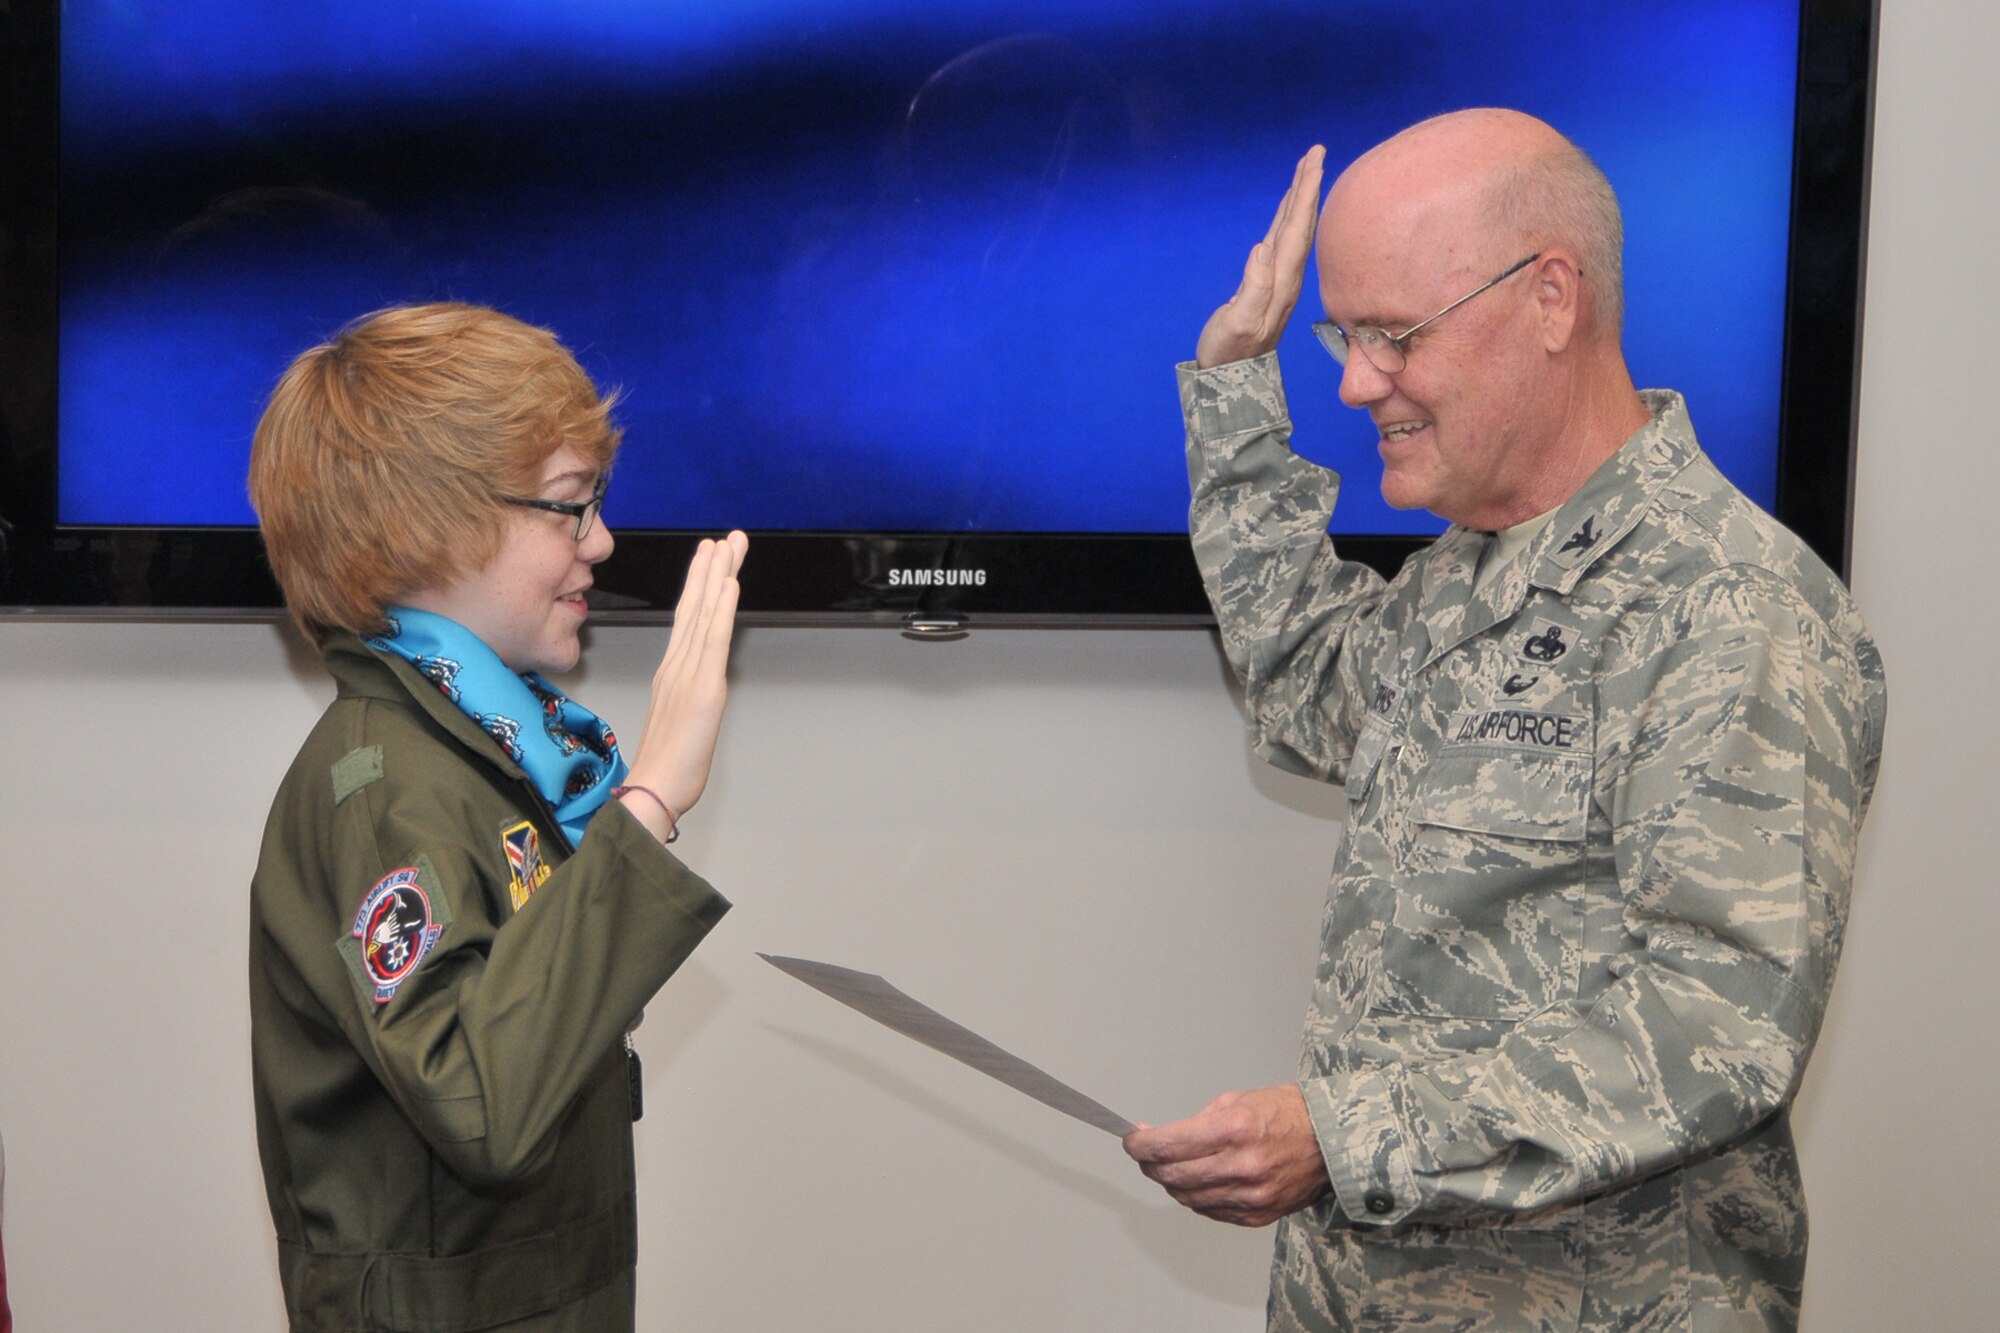 YOUNGSTOWN AIR RESERVE STATION, Ohio -- Air Force Reserve Col. Dale Andrews (right), commander of the 910th Maintenance Group, swears in 15-year old Connor Covan, of nearby Boardman, Ohio, as an honorary second lieutenant as part of the wing's 45th Pilot for a Day (PFAD) program held here, August 10, 2011. Connor is currently receiving treatment for Juvenile Rheumatoid Arthritis and Brugada Syndrome at Akron Children's Hospital of the Mahoning Valley, also in Boardman. The purpose of the PFAD program is to reach out to the community by providing a day of activities to children who live with a chronic or life-threatening disease or illness. U.S. Air Force photo by Tech. Sgt. James Brock.
 